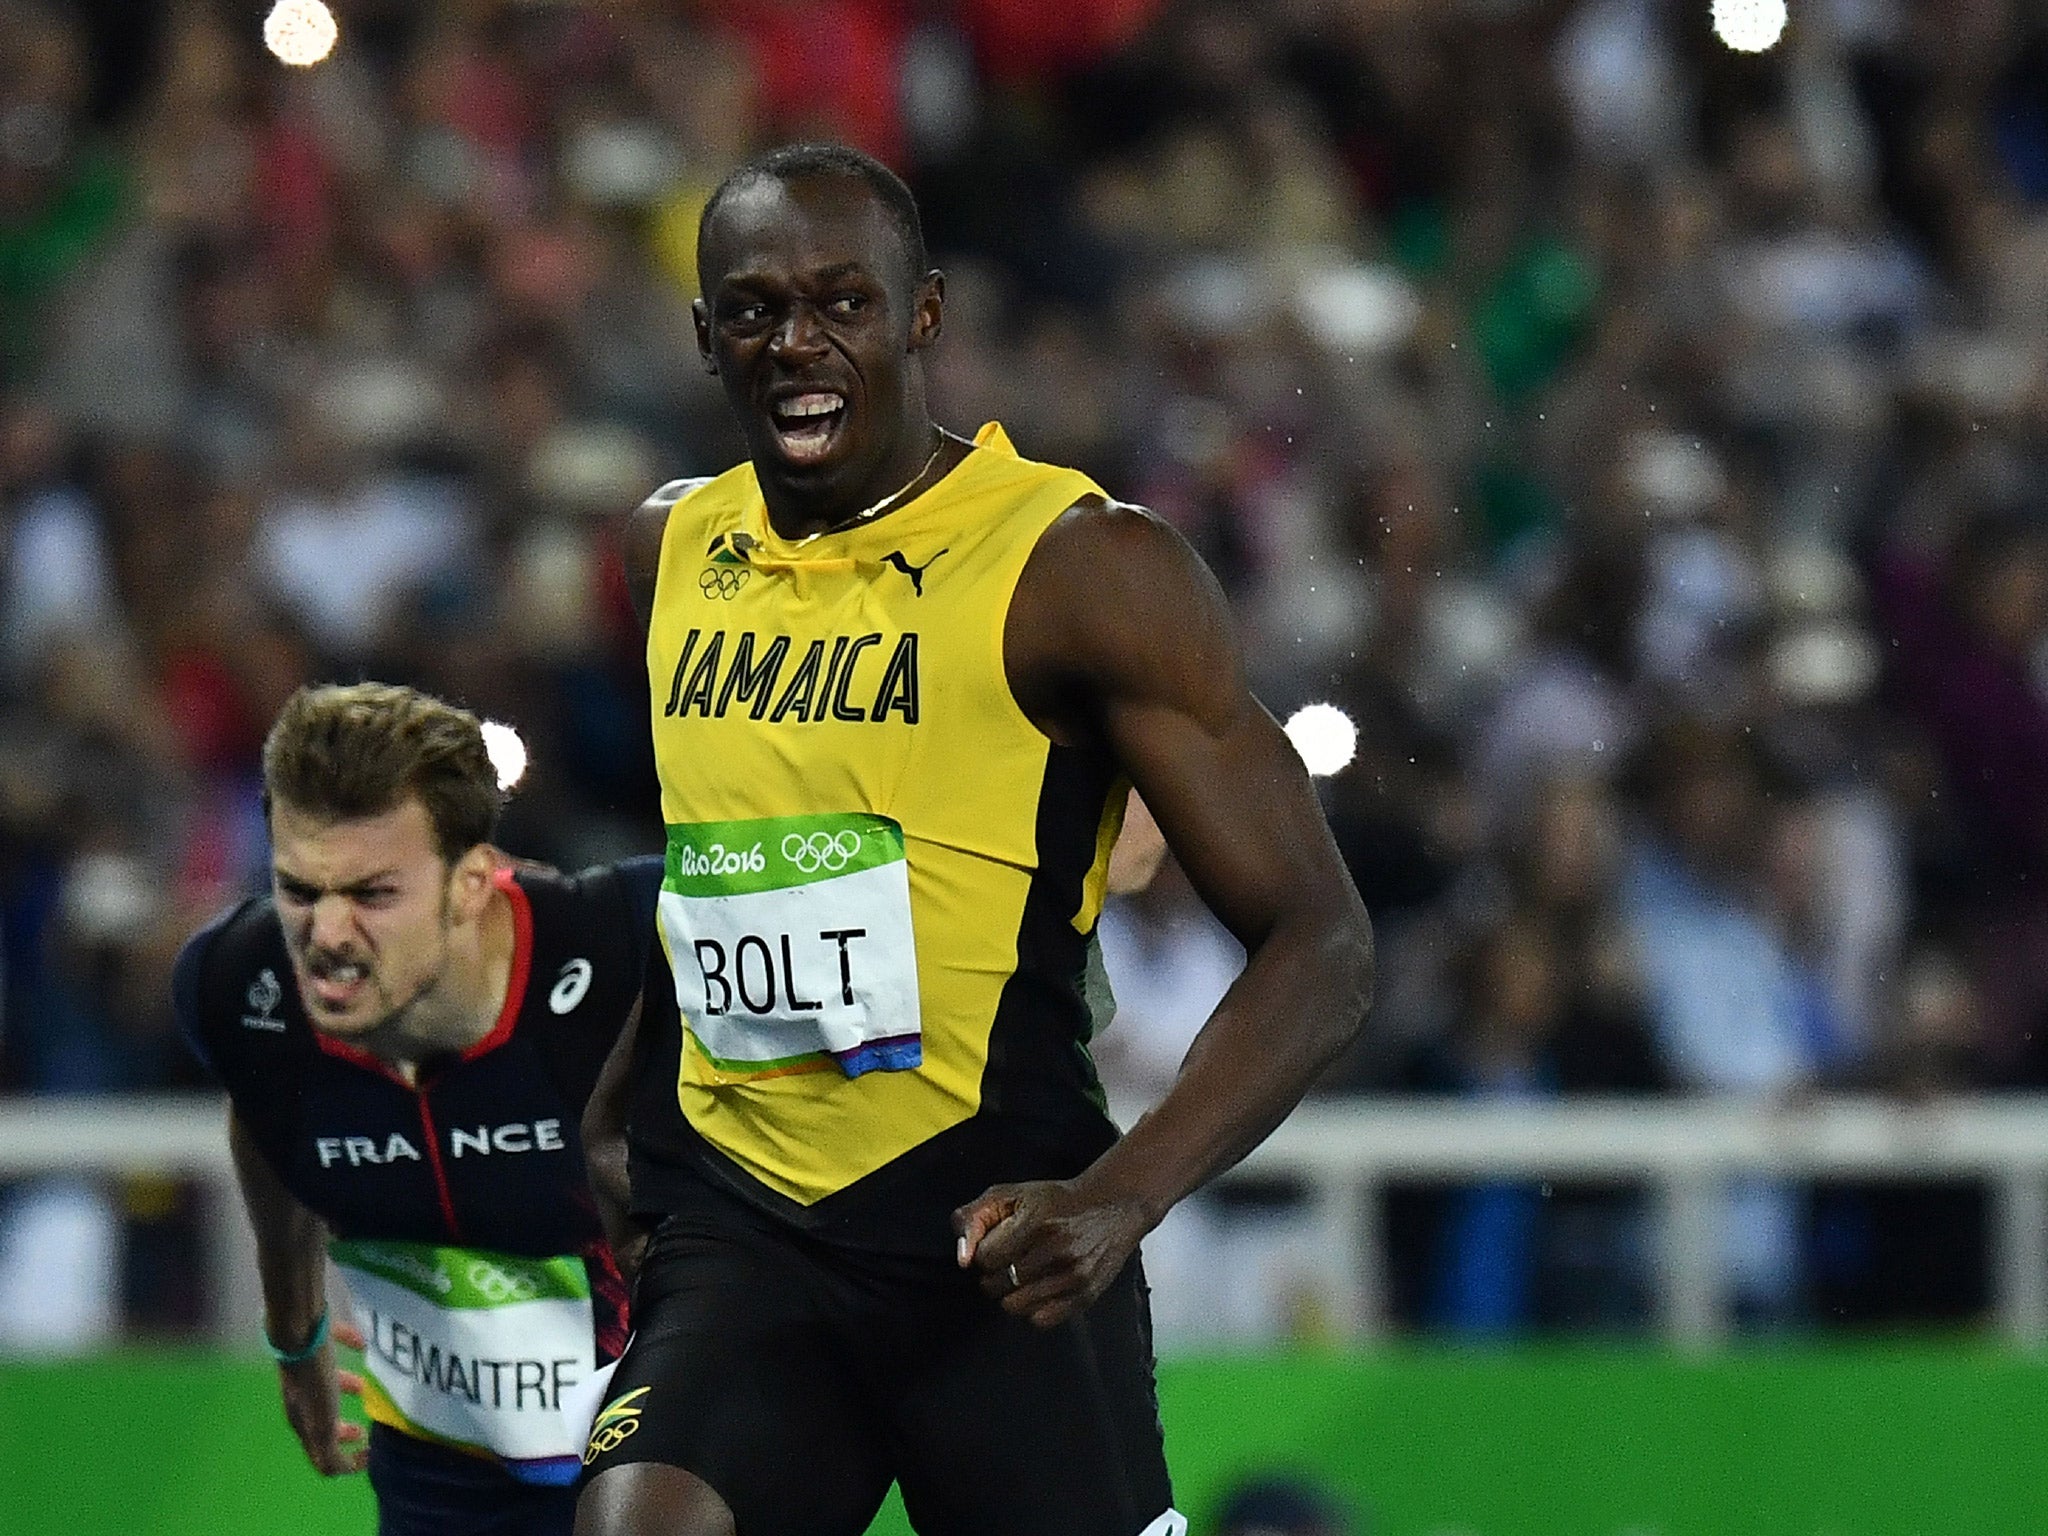 Usain Bolt will run at the Olympics for the final time in the men's 4x100m relay